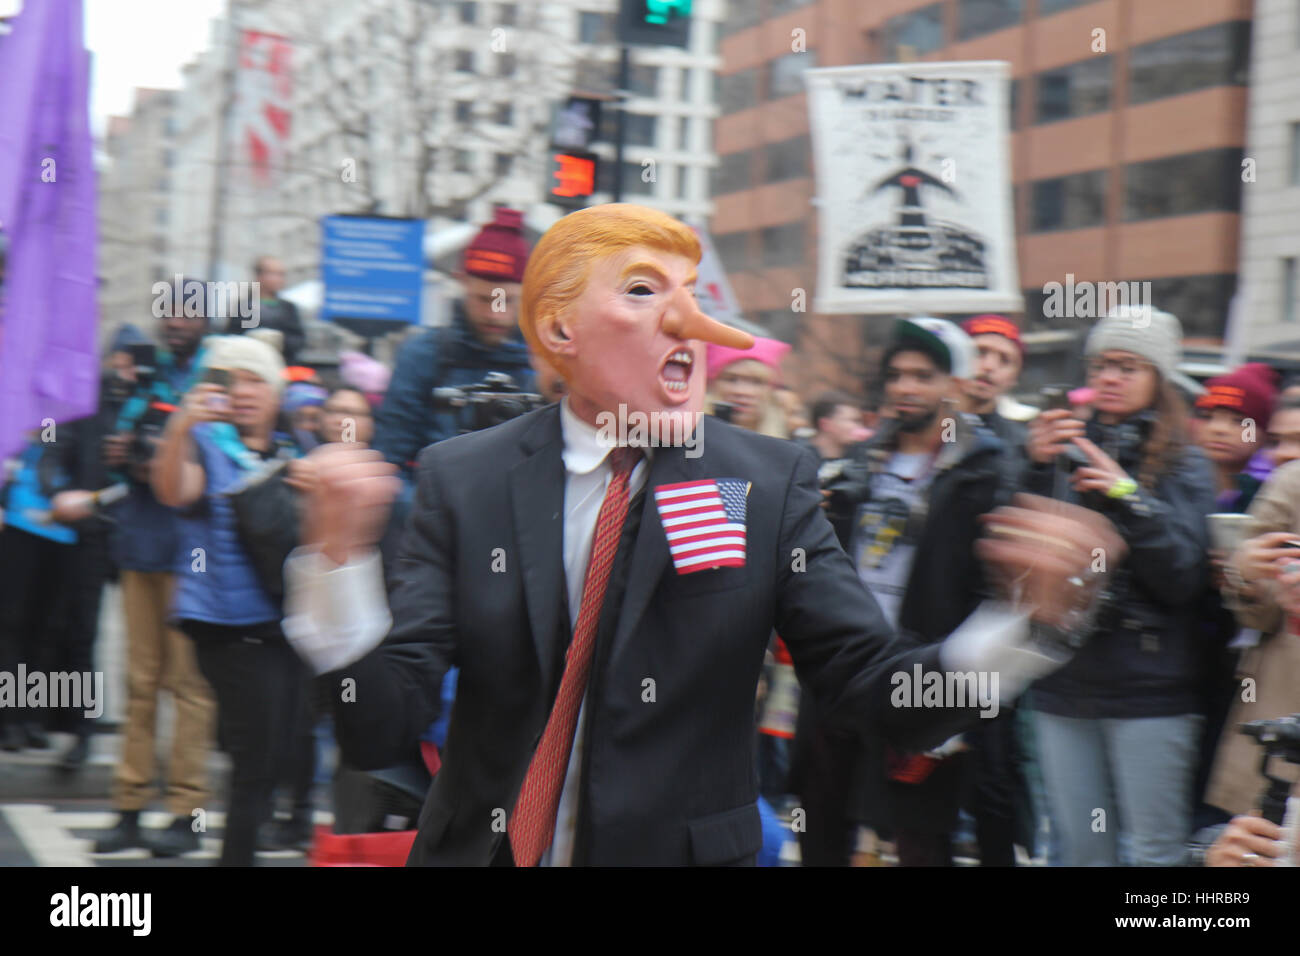 Washington, USA. 20th January, 2017. A protester wearing a Donald Trump mask lampoons the new president on the day of the inauguration of Donald J Trump as President of the United States. Credit: Susan Pease/Alamy Live News Stock Photo